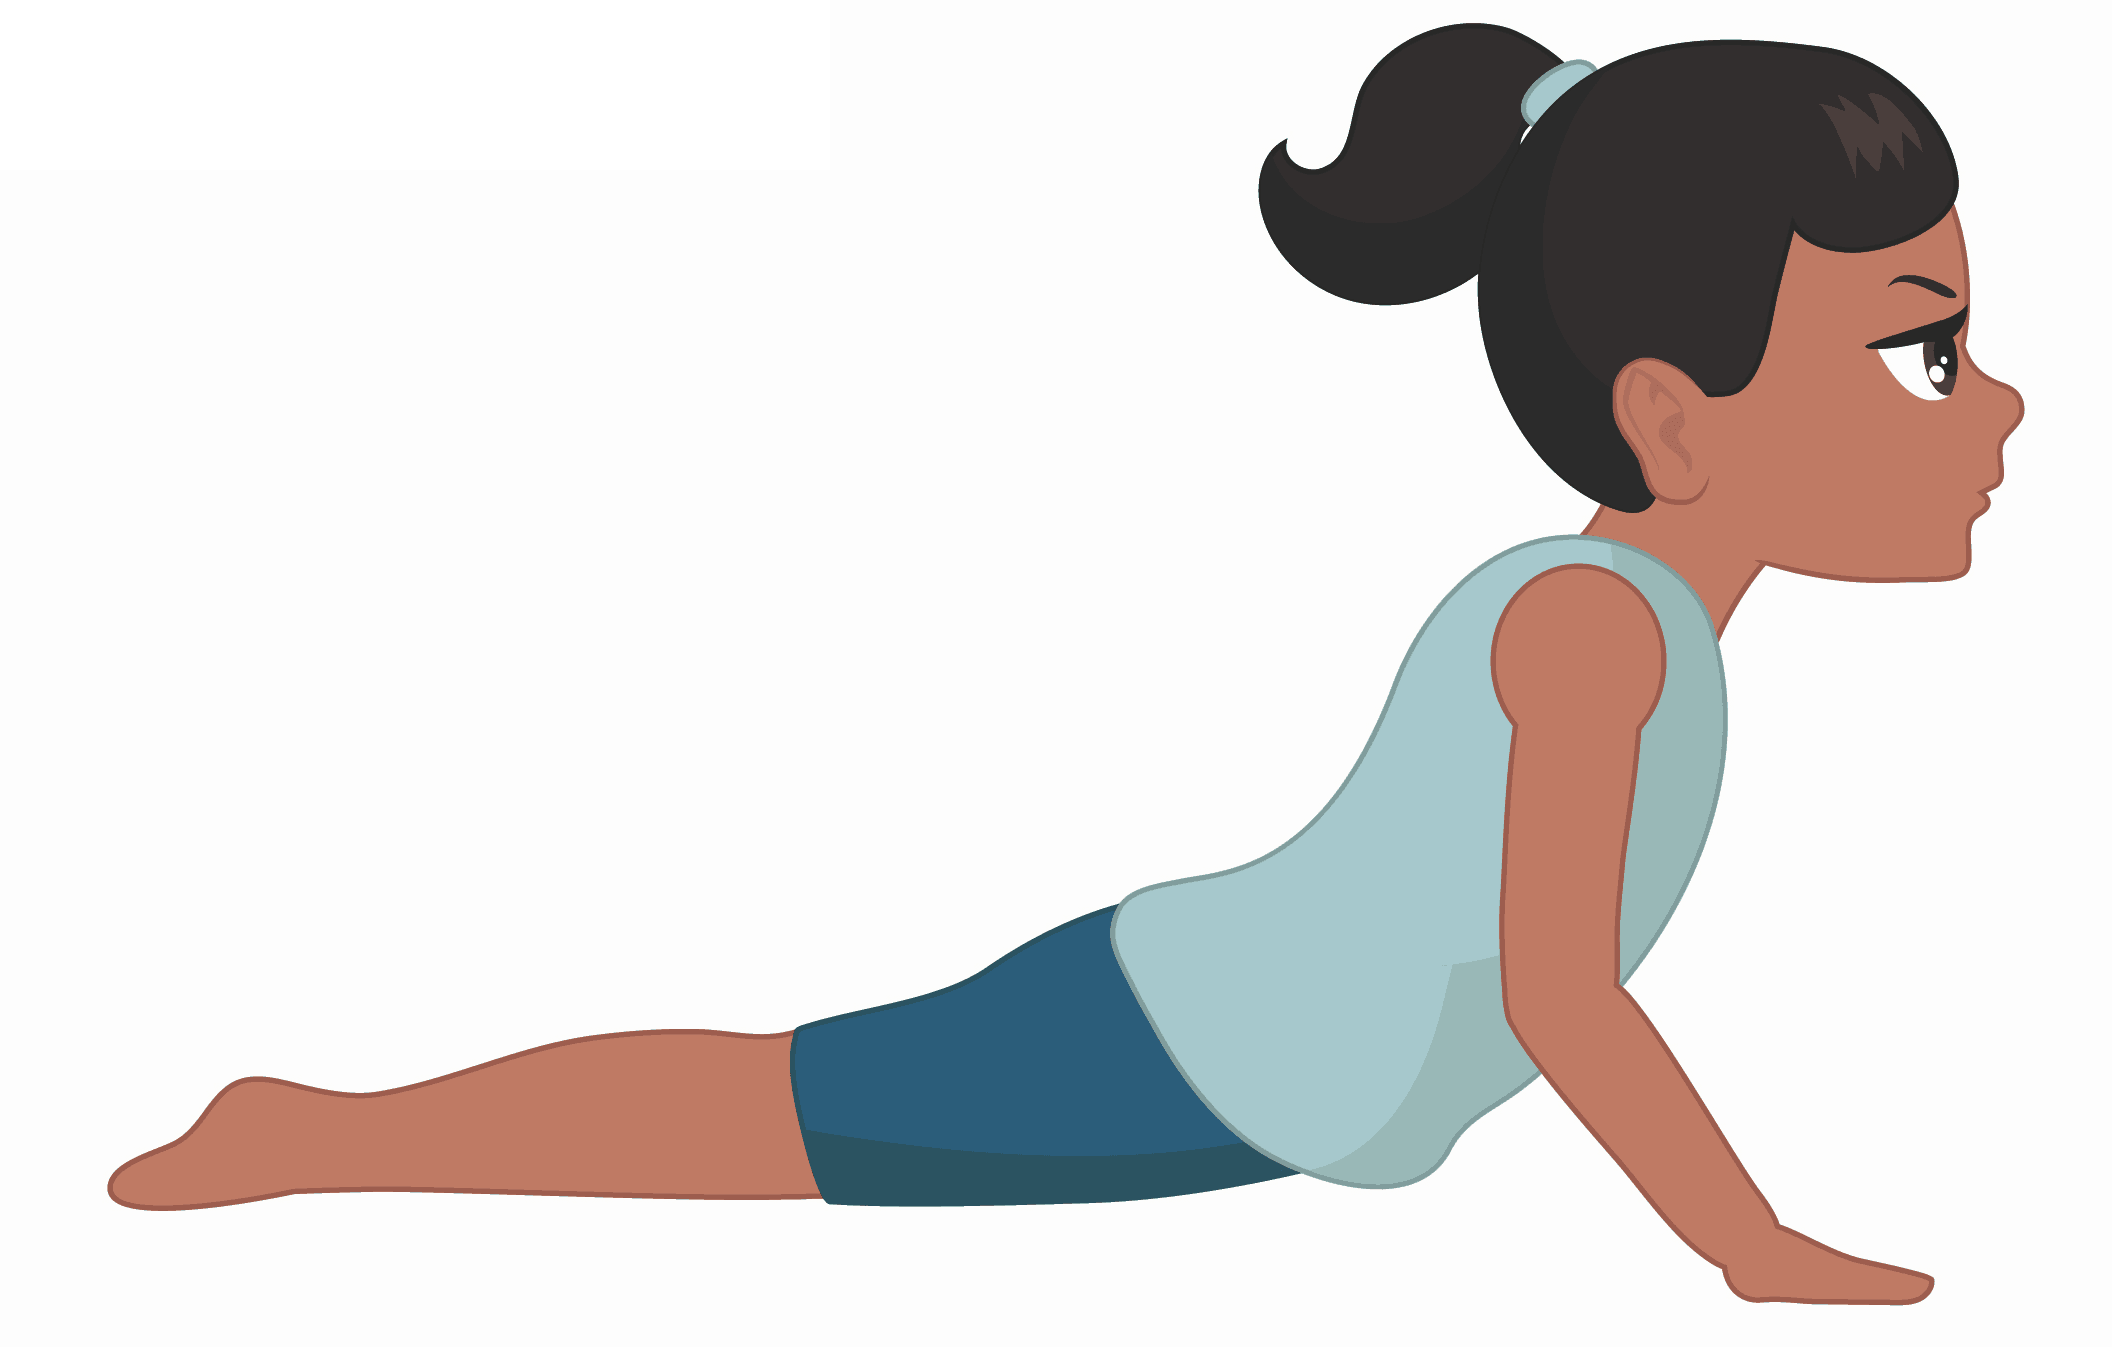 girl is practicing cobra pose for kids, laying on her tummy with legs straight behind her and arms pressing into the floor to lift her torso and look forward